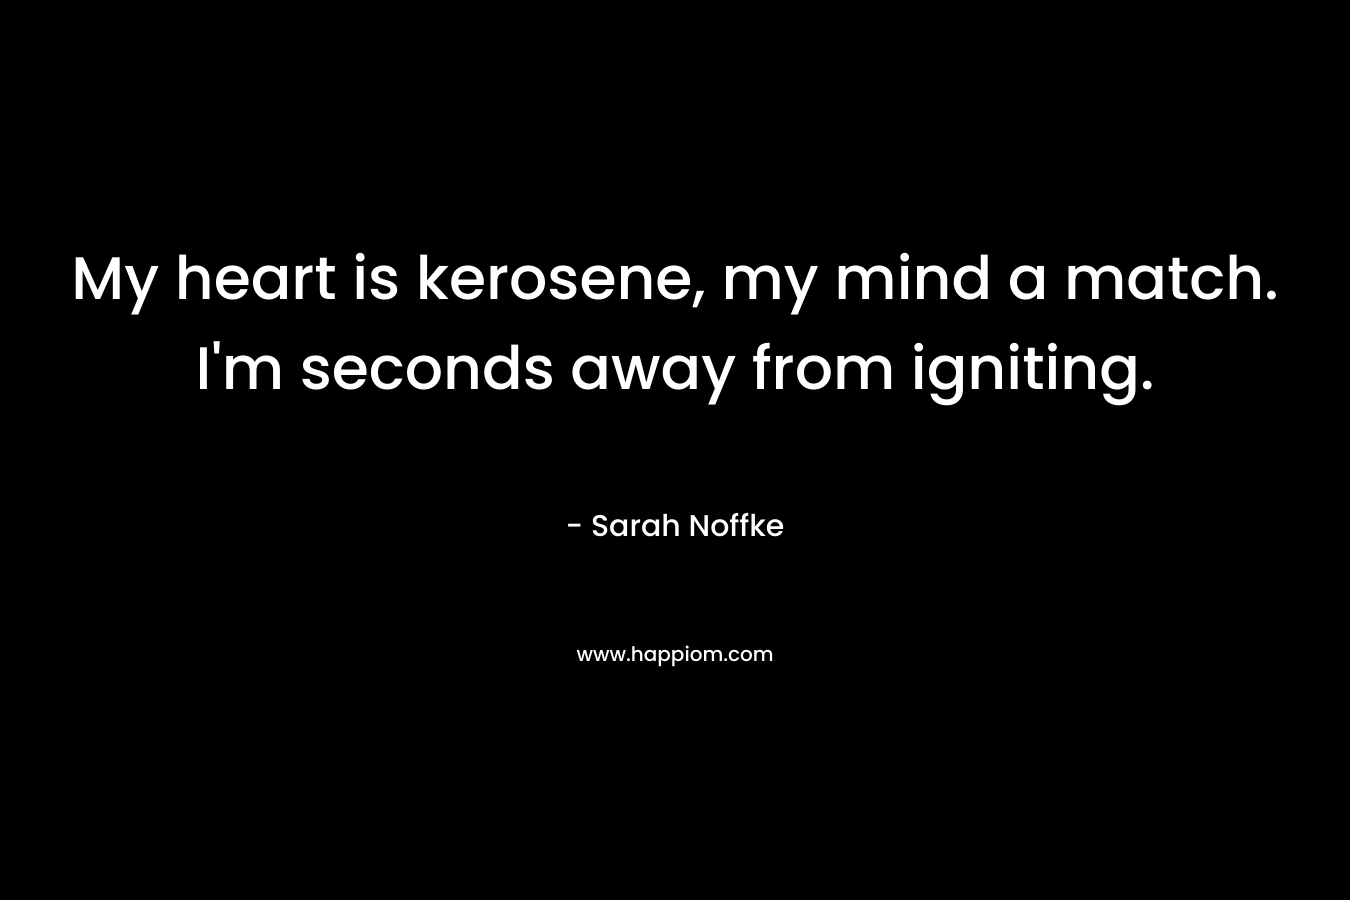 My heart is kerosene, my mind a match. I'm seconds away from igniting.